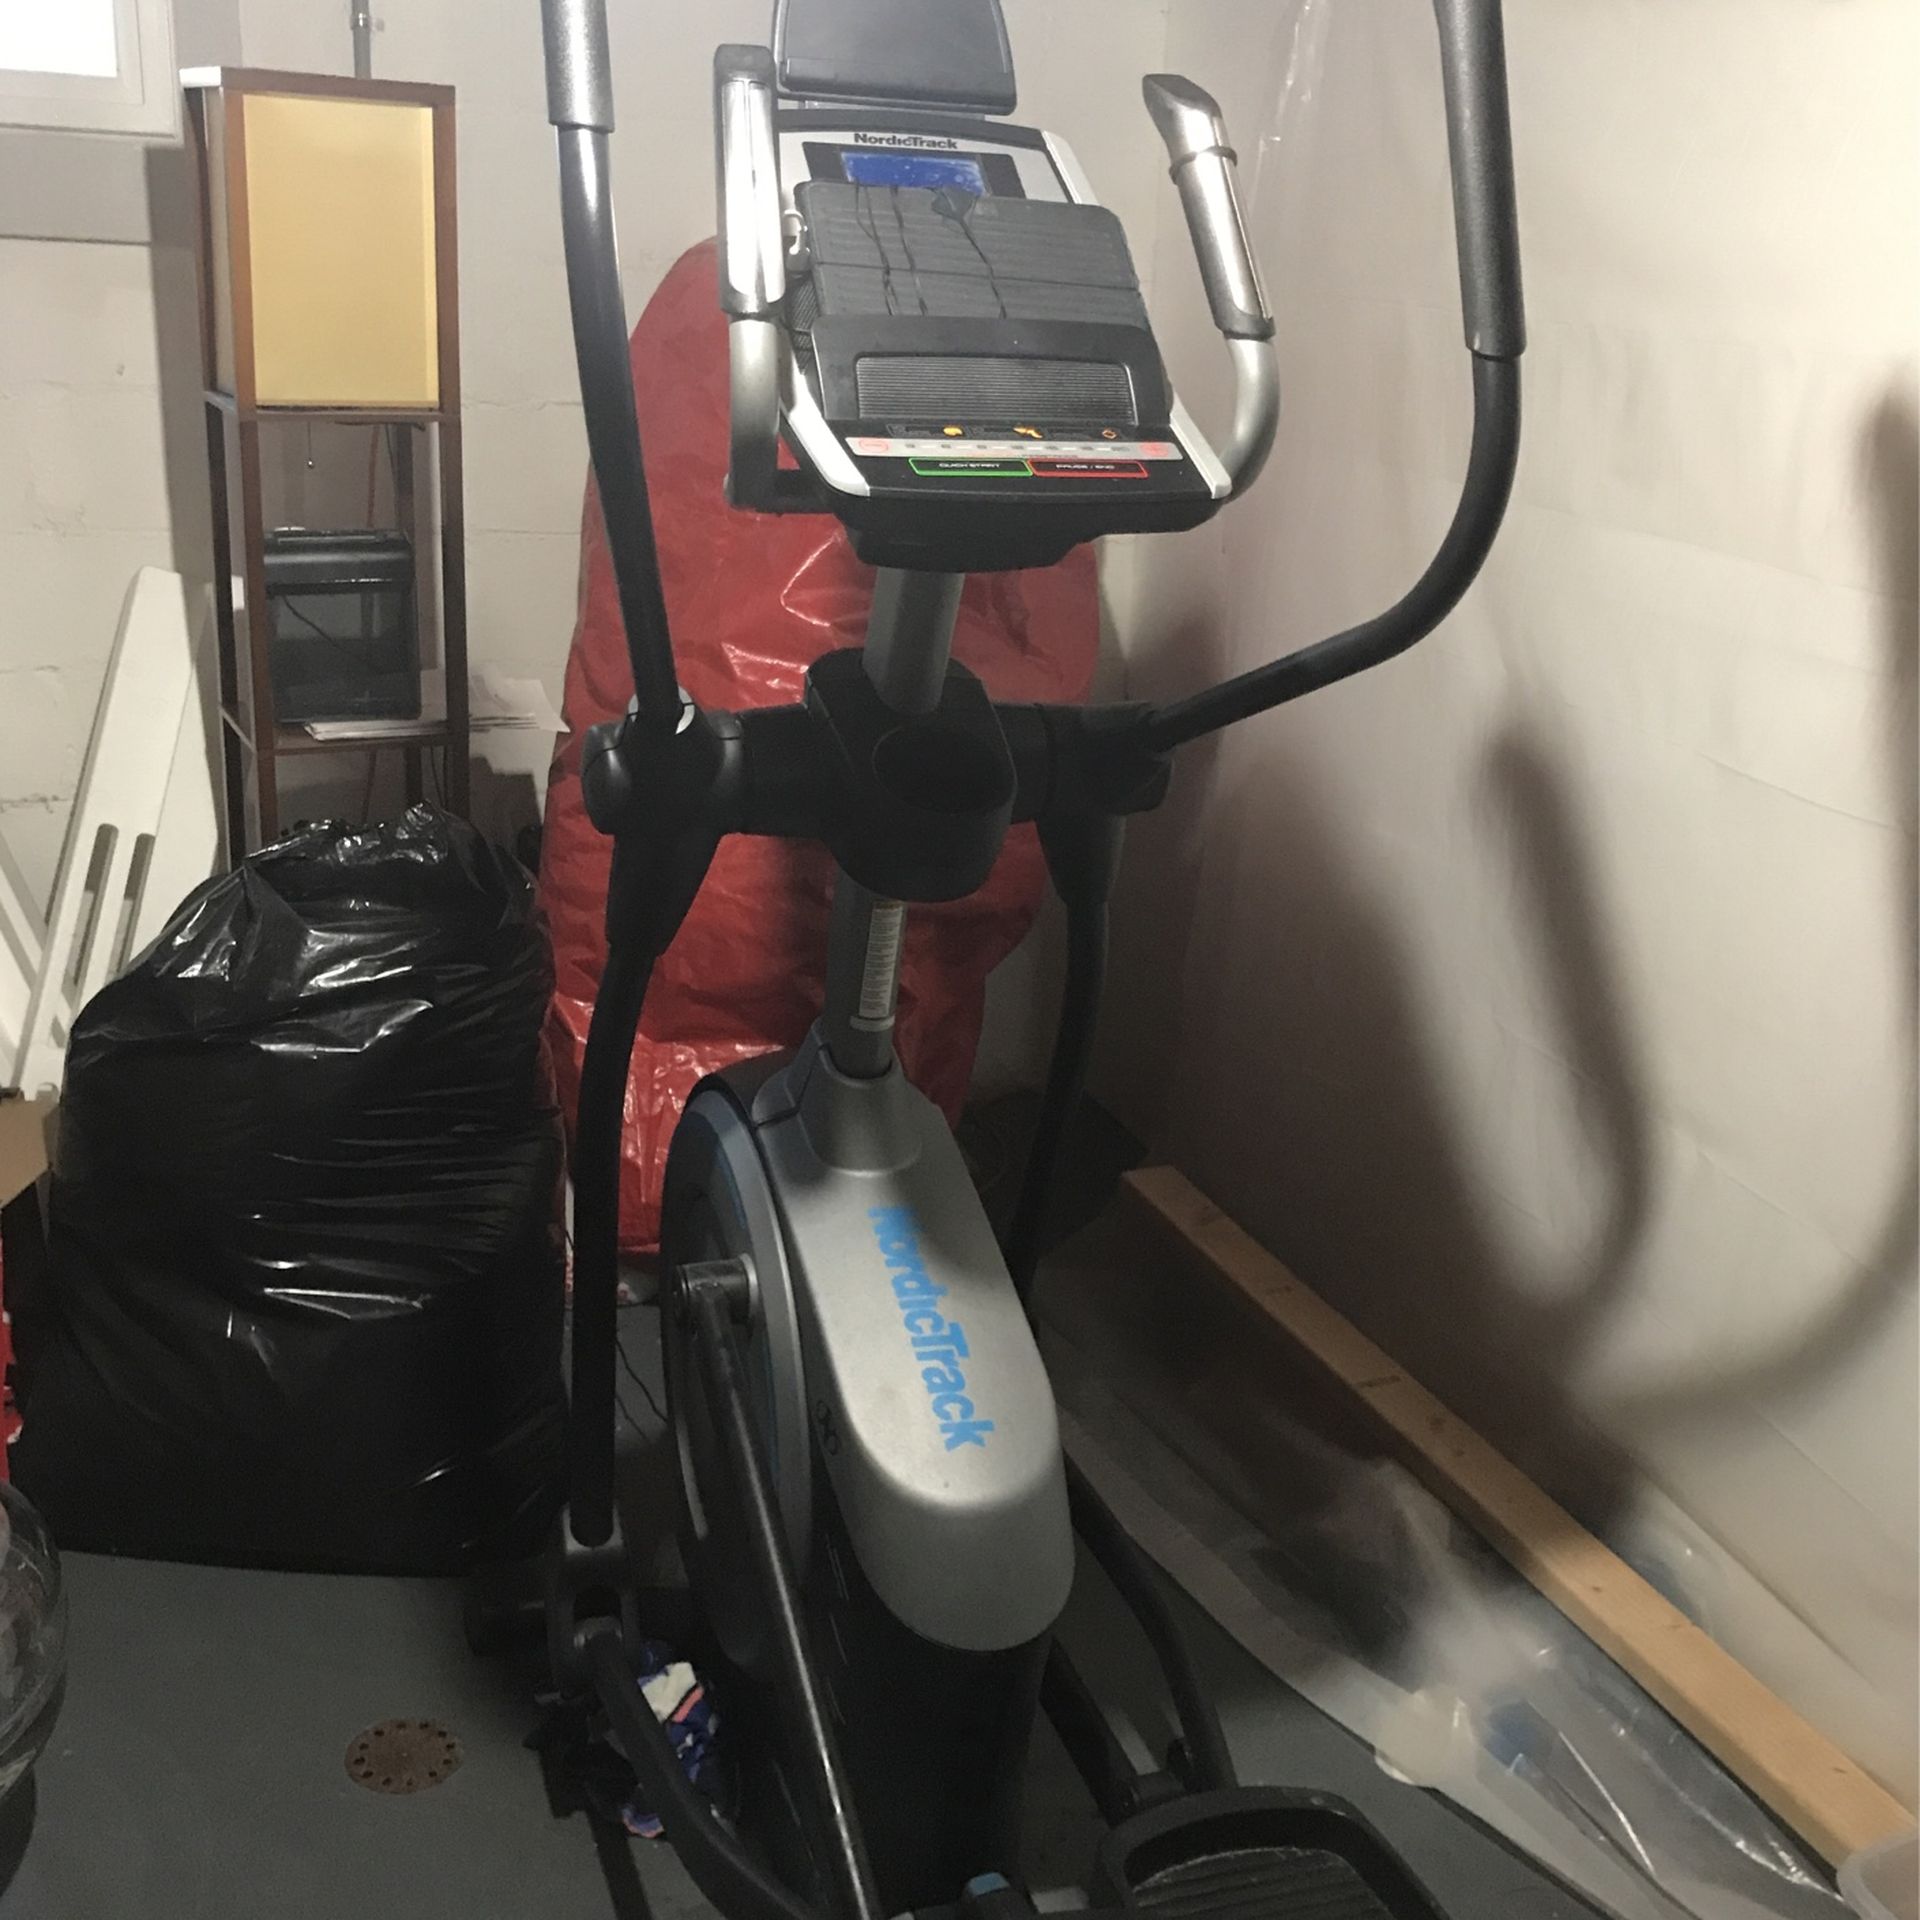 NordicTrack elliptical has a crack in the neck and squeaks